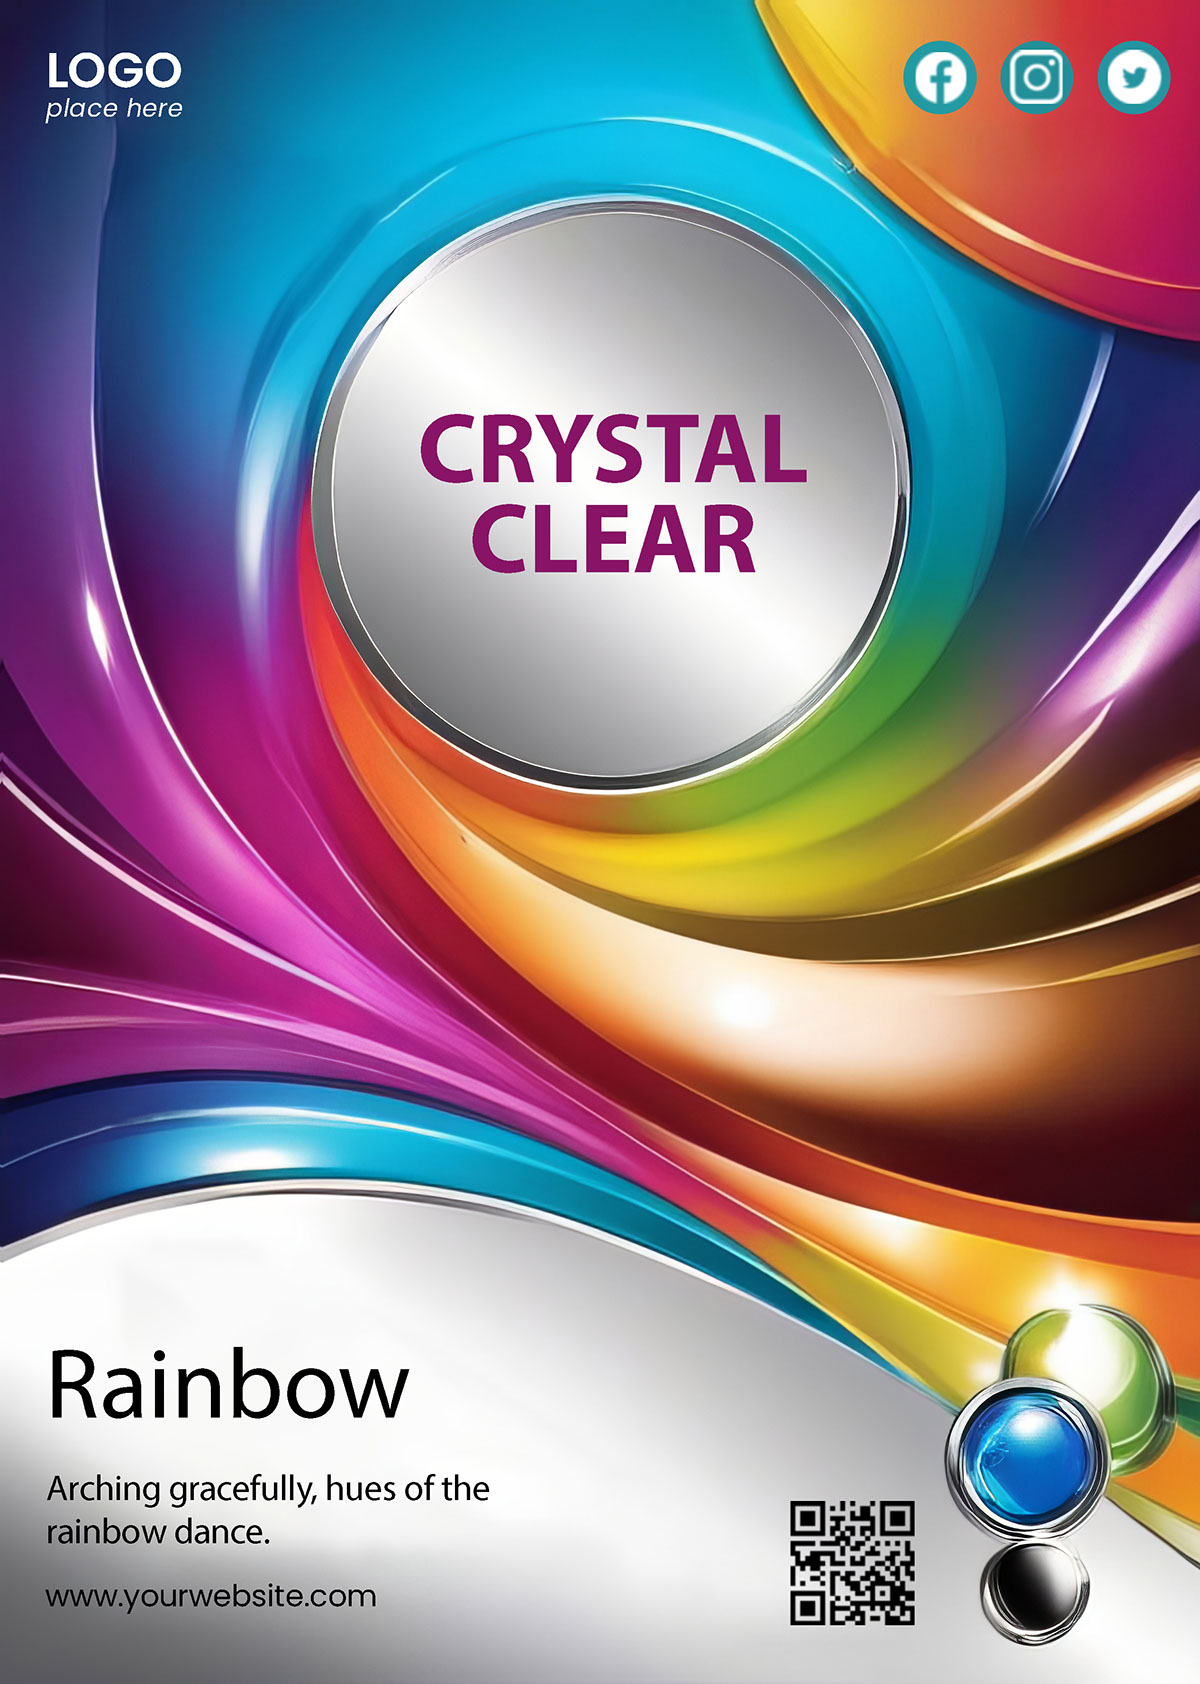 Crystal Clear Creativity rendition image